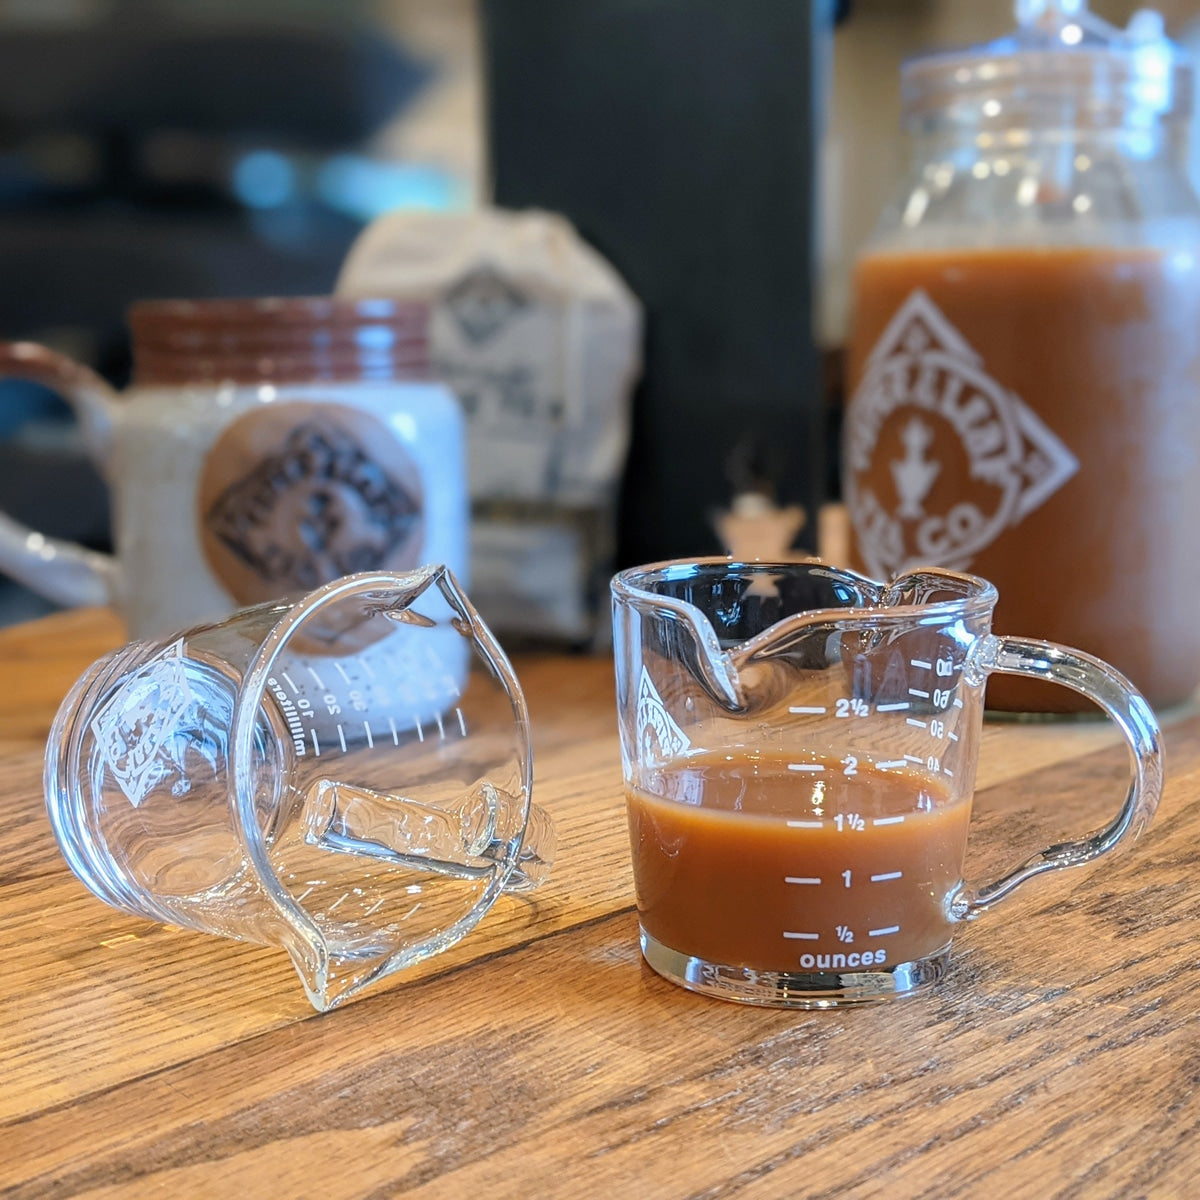 Piper Mini Measure - a tiny glass measuring cup with a little handle. Printed with the Piper & Leaf logo and measurements up to 2.5oz or 70ml